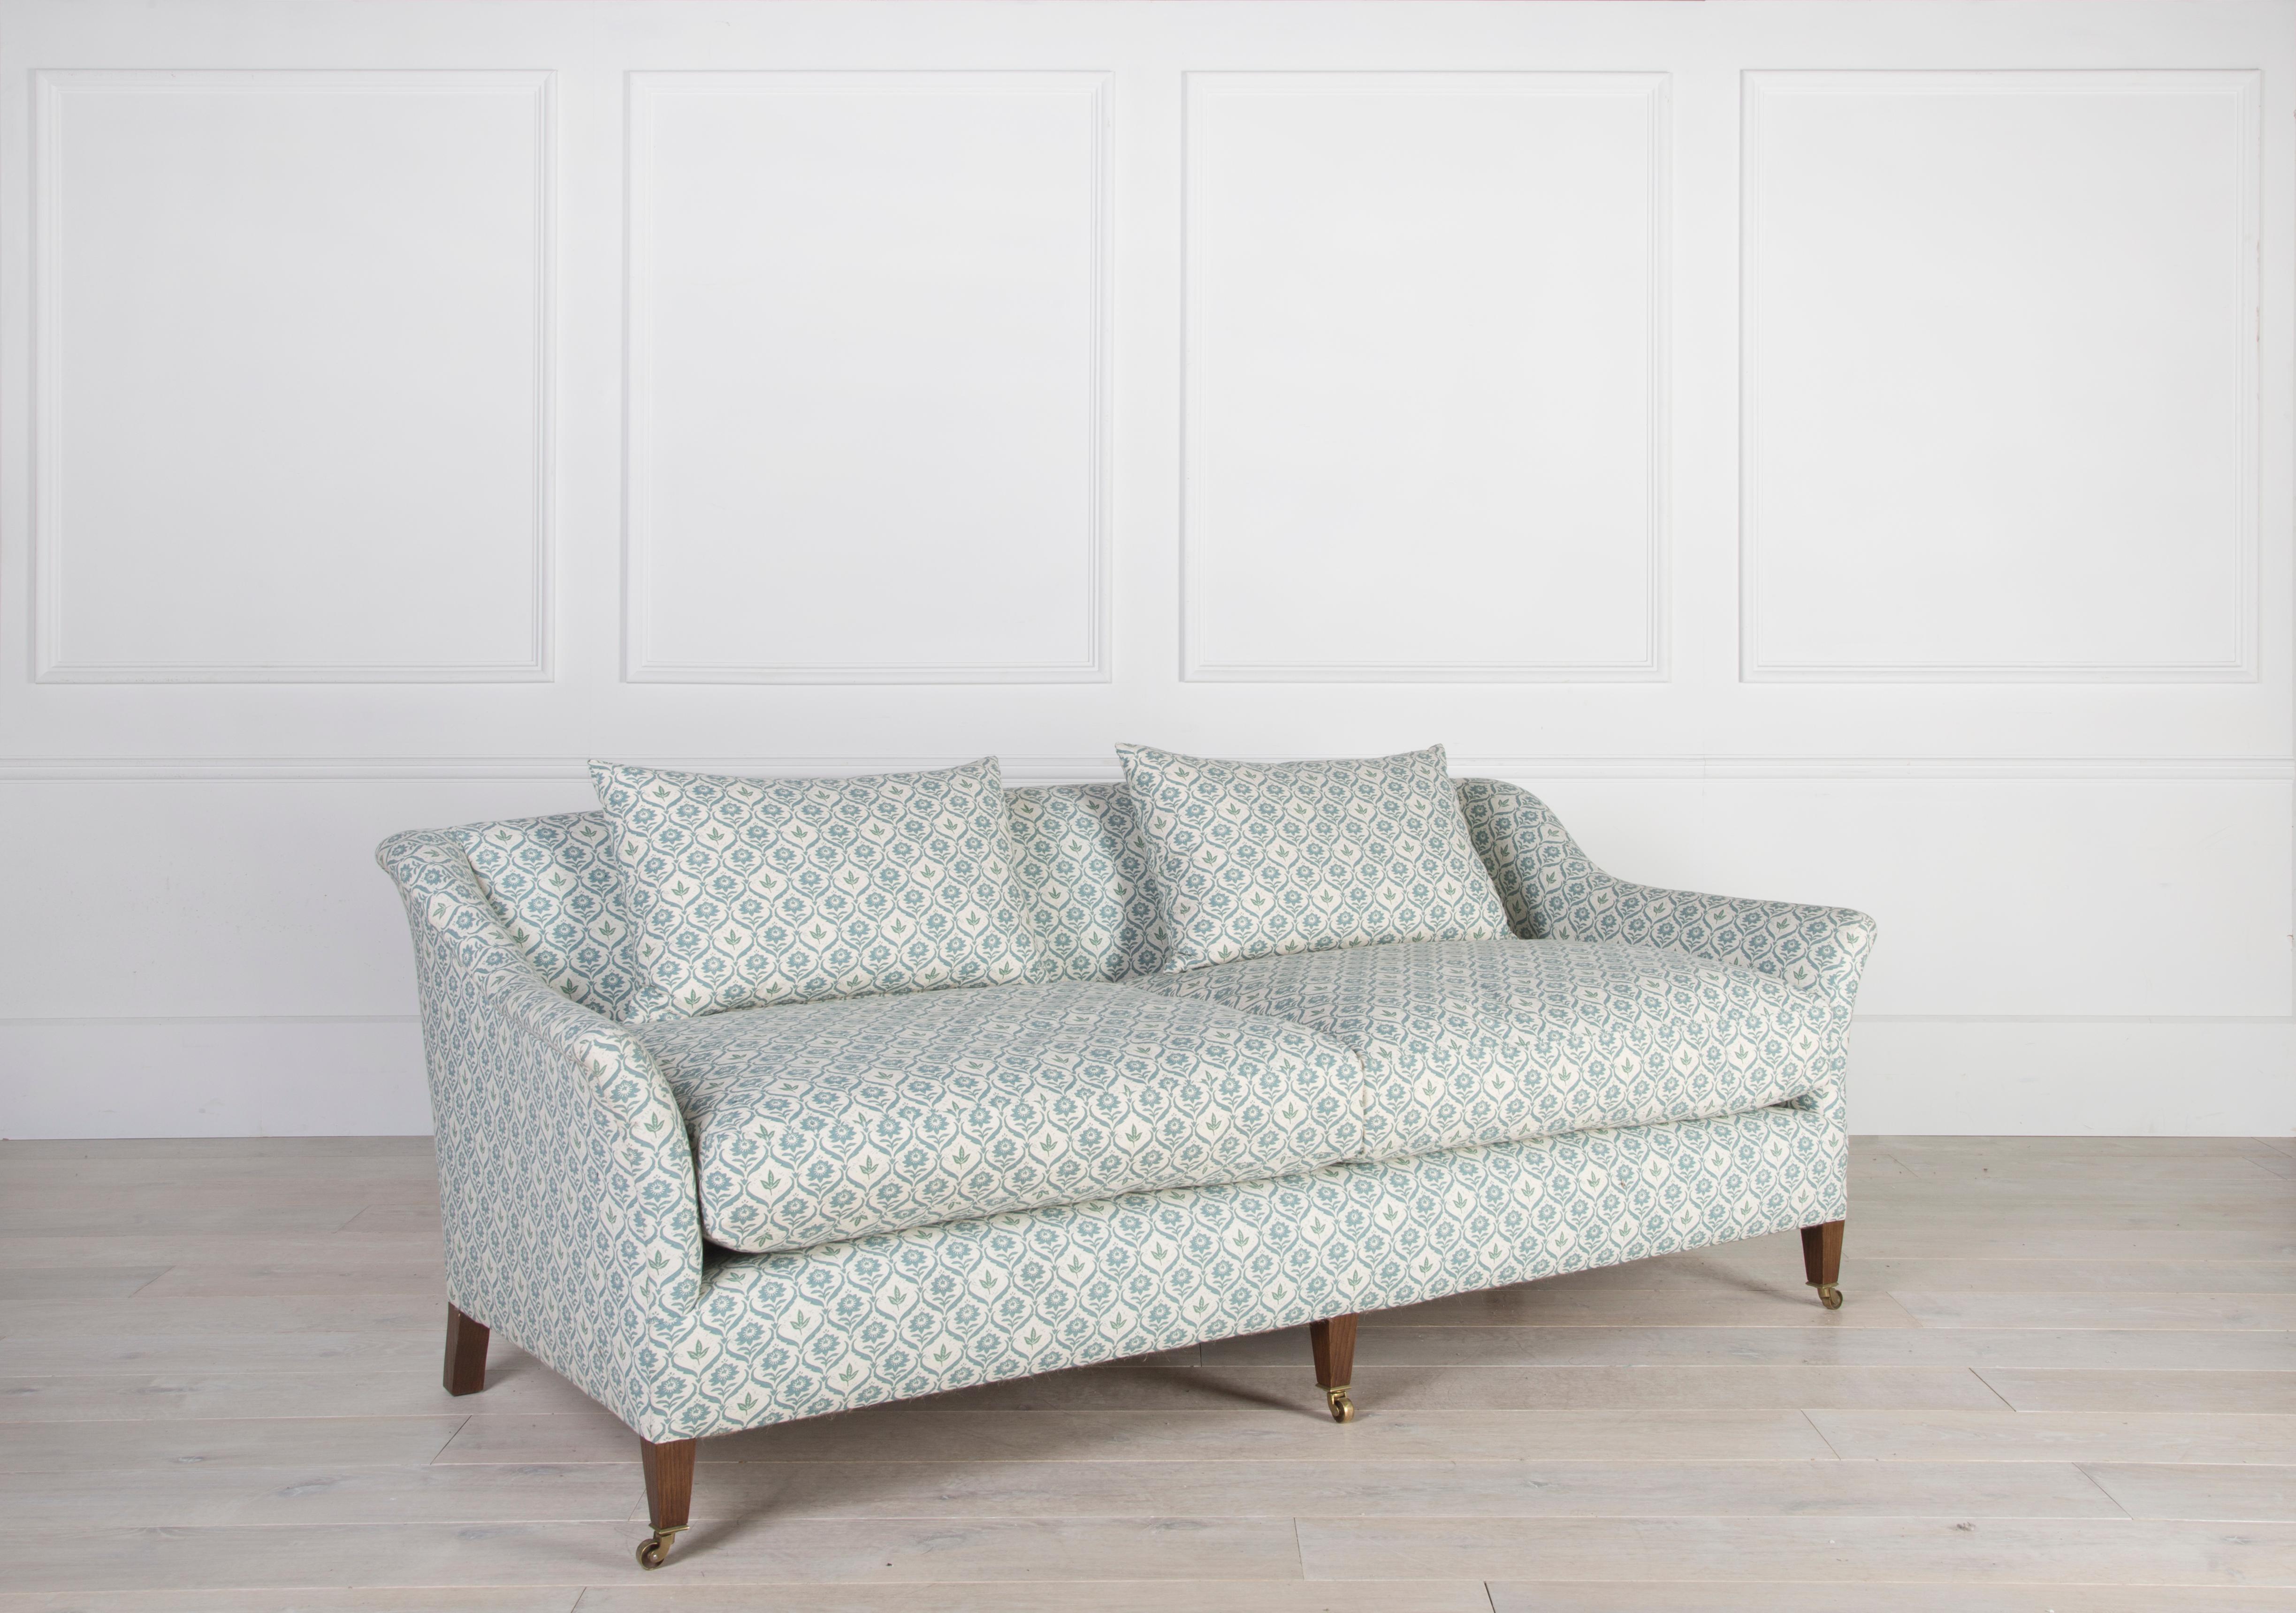 Made to order from our Lorfords Contemporary collection, the Traditional Elmstead is a timeless blend of elegance, comfort and tradition.

We build our Traditional Elmstead Sofa up from a hardwood beech frame, using only traditional methods and